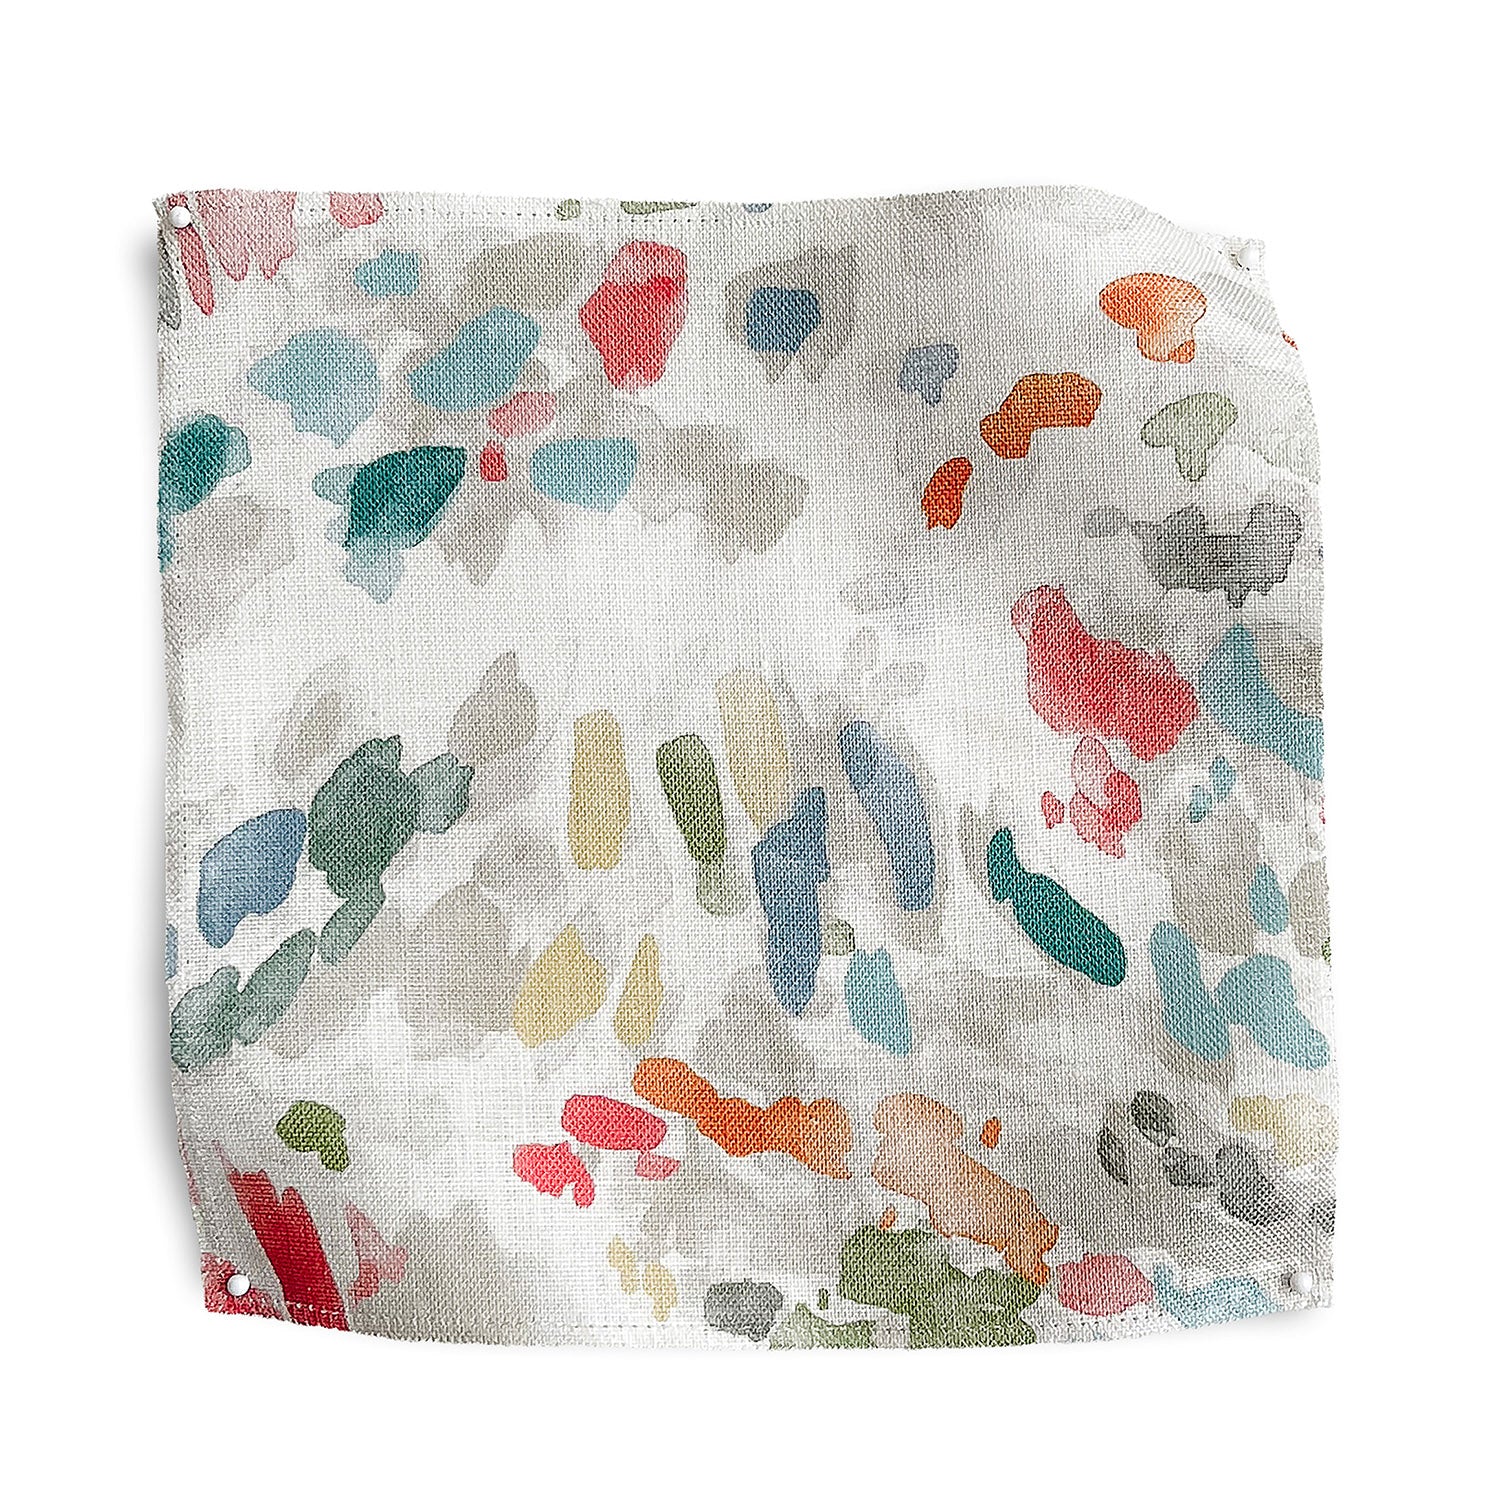 Square fabric swatch in a painterly cloud print in shades of red, green, tan and blue on a cream field.